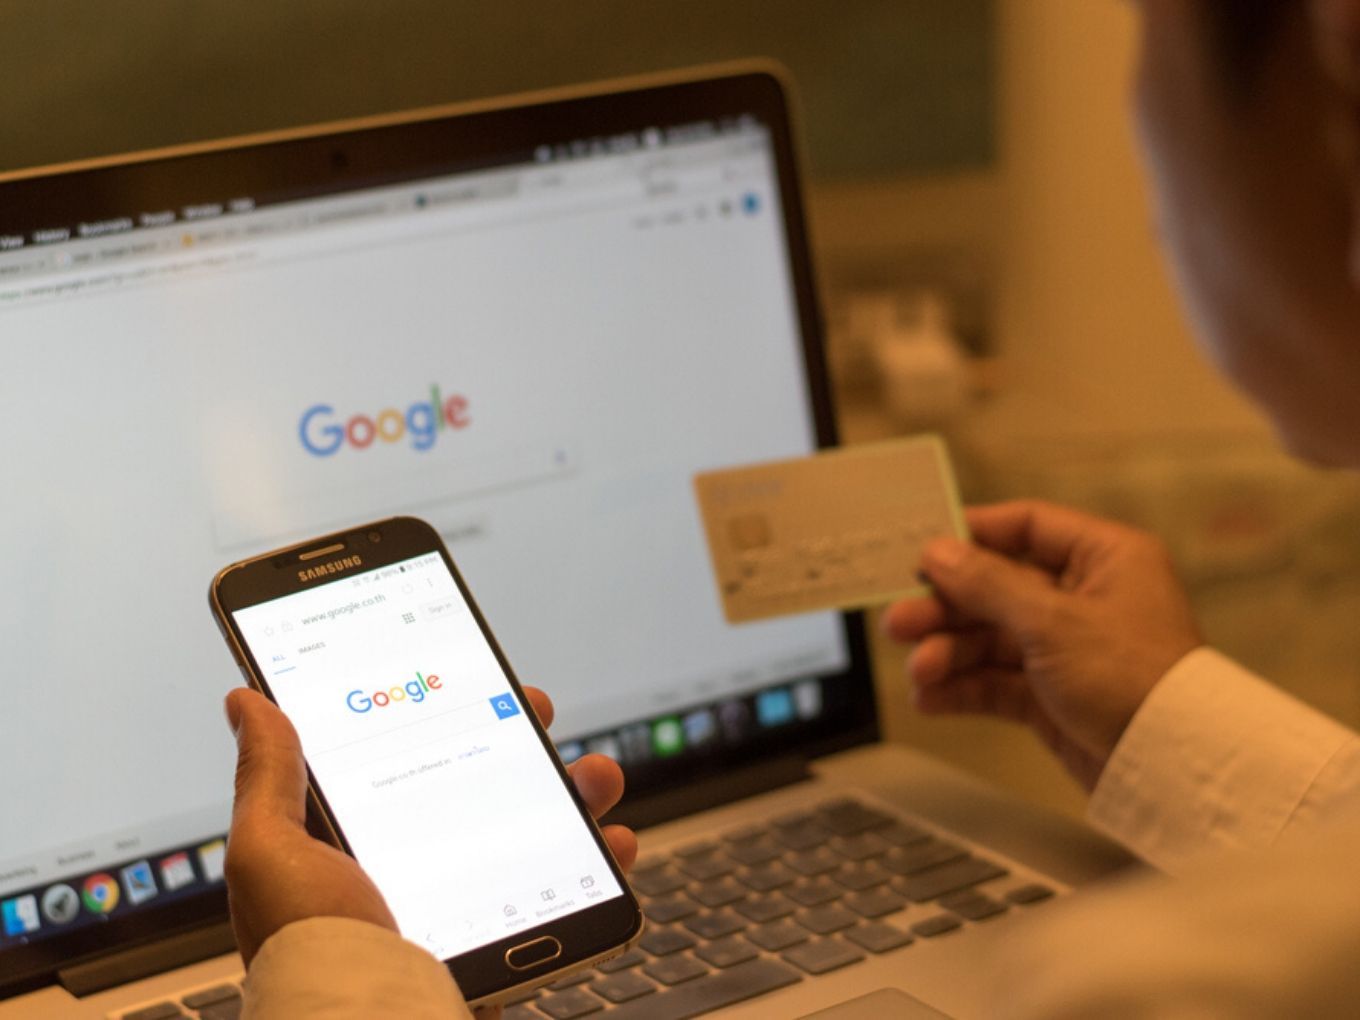 Google Pay Sets Eyes On Debit Cards To Strengthen Payments